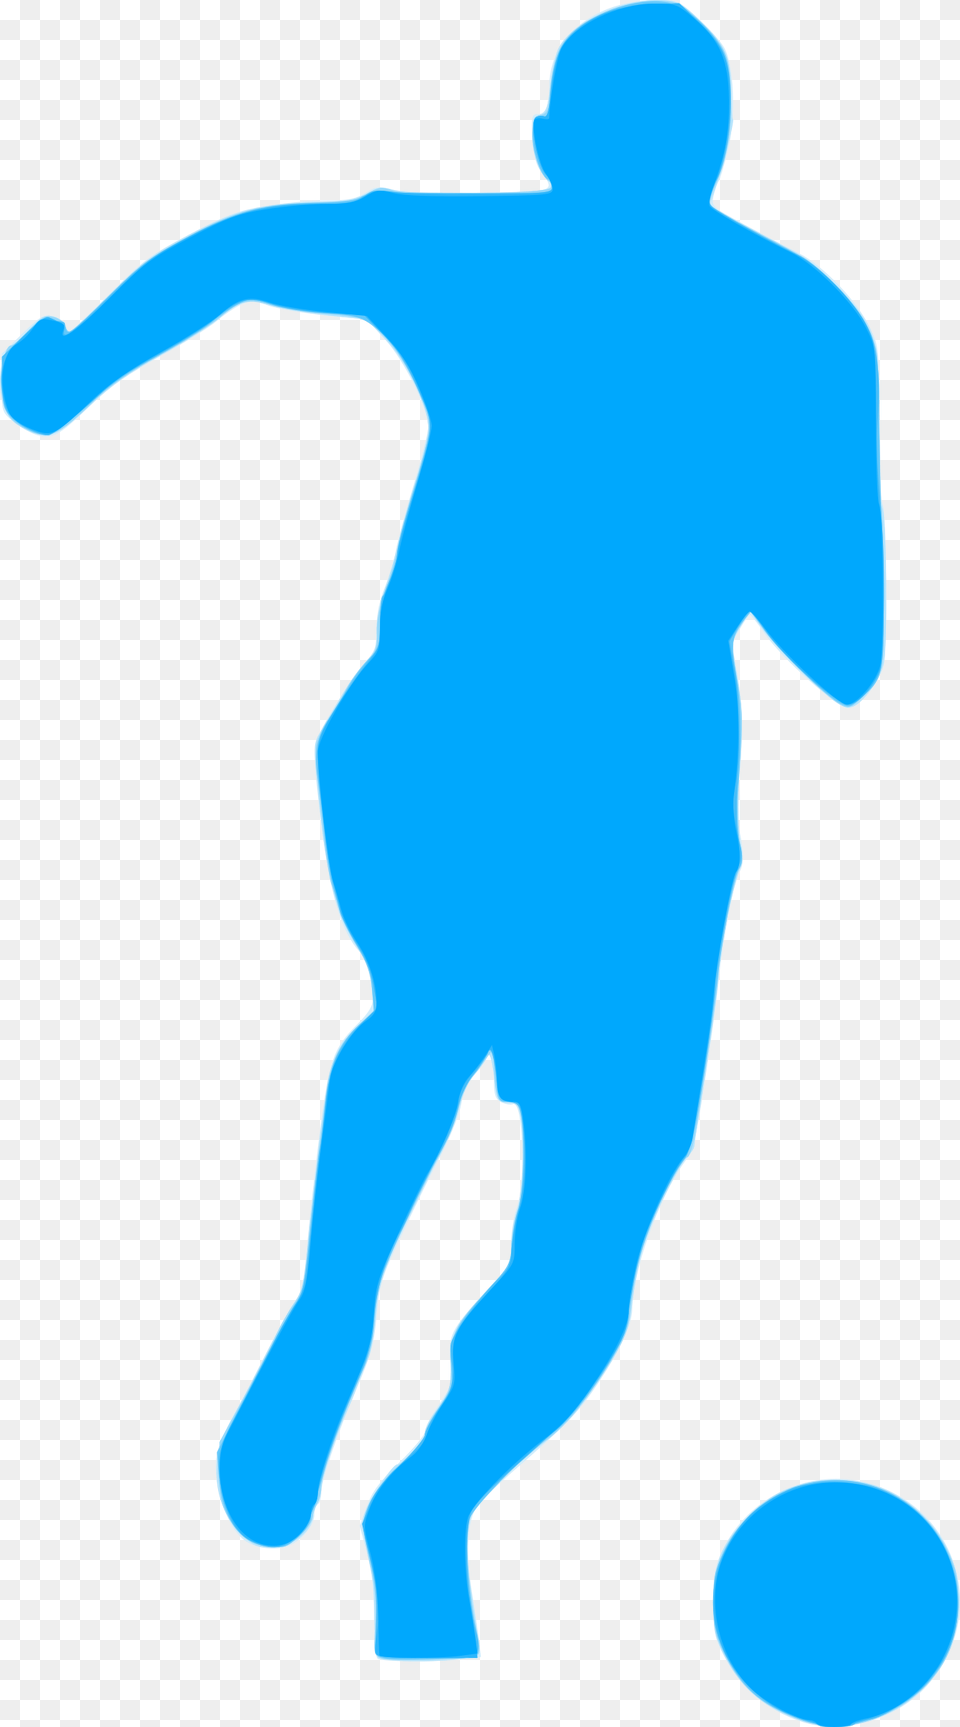 This Icons Design Of Silhouette Football, Adult, Male, Man, Person Png Image